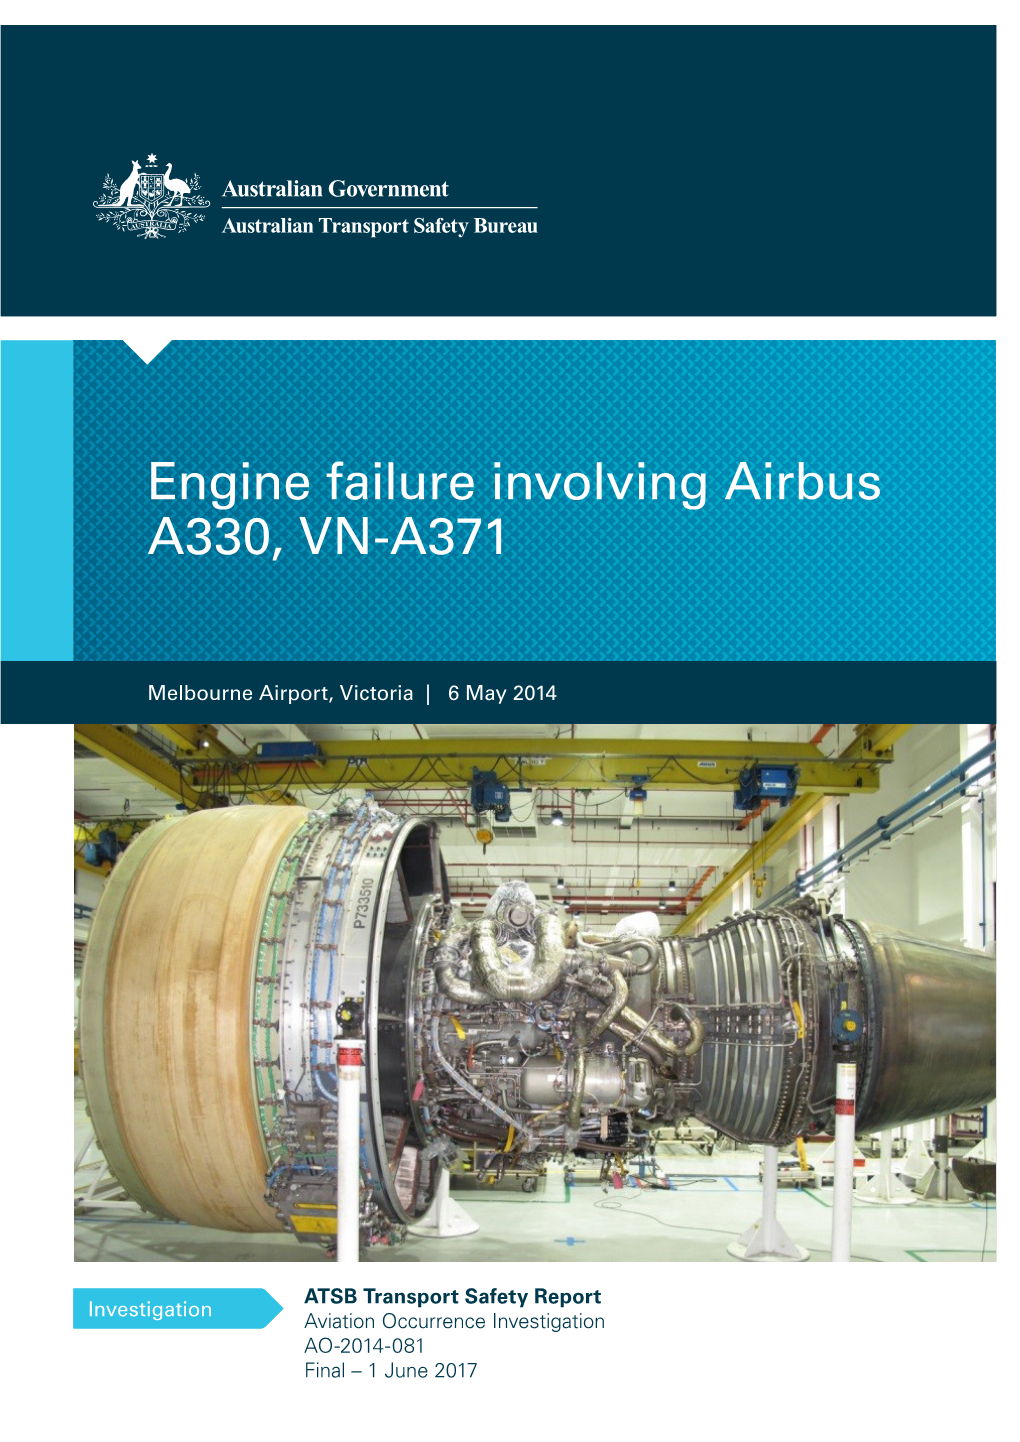 Engine Failure Involving Airbus A330, VN-A371 Melbourne Airport, Victoria, 6 May 2014